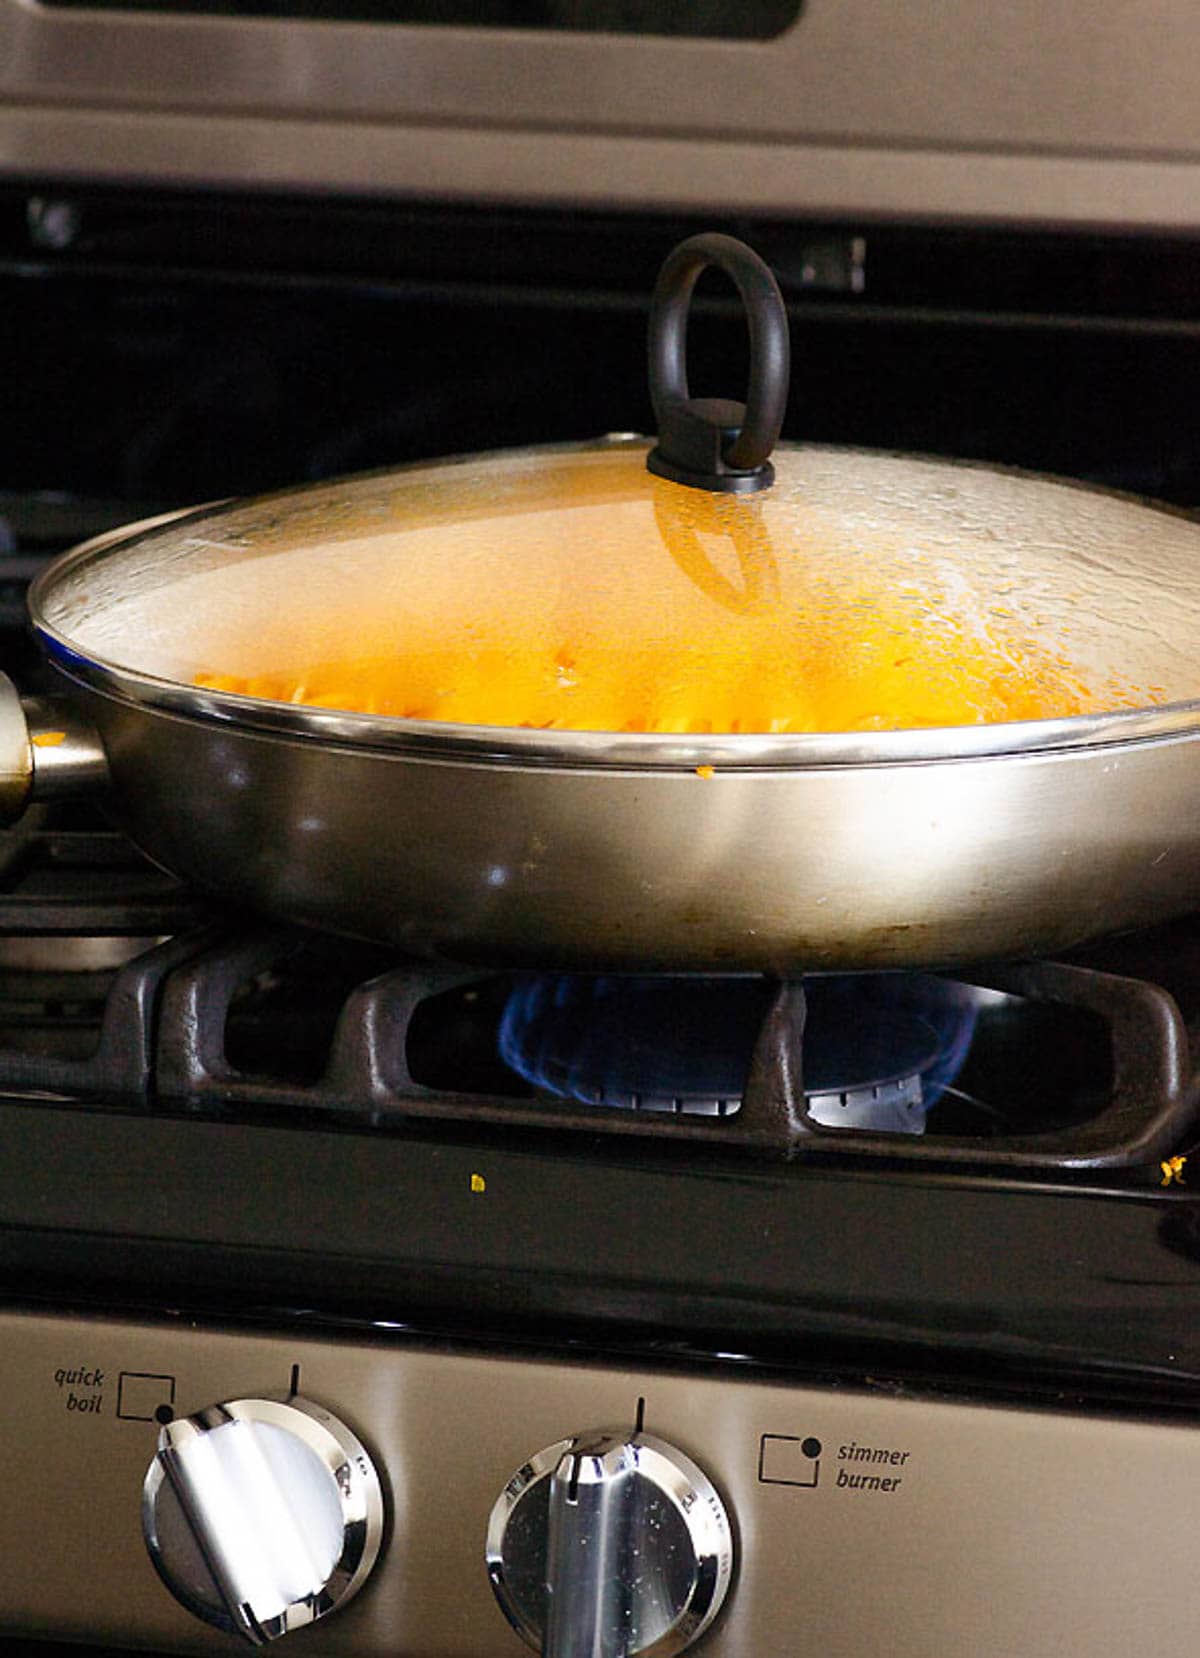 Butternut squash noodles in a skillet with lid on the stove.